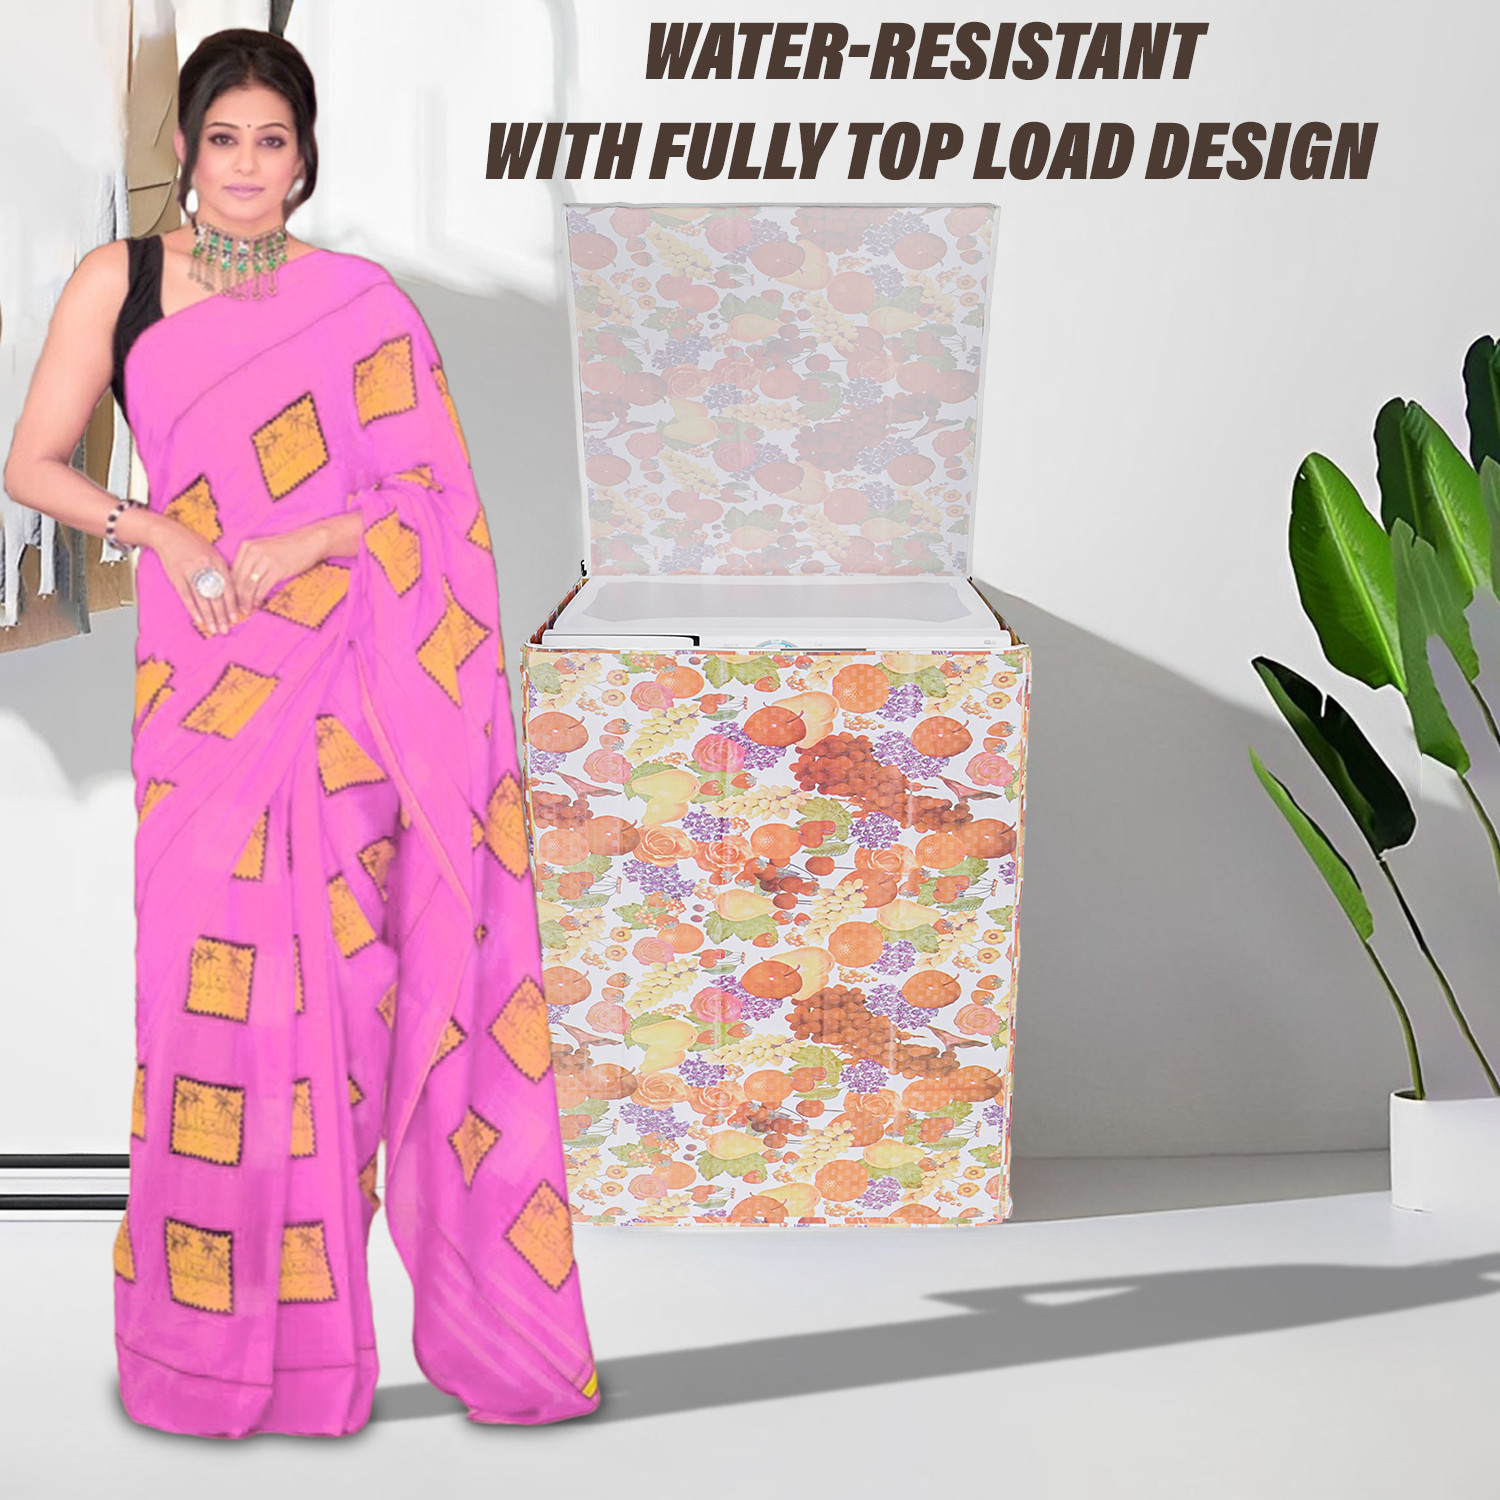 Kuber Industries Washing Machine Cover | Fruit Print Washing Machine Cover | PVC | Top Load Fully-Automatic Washing Machine Cover | Multi